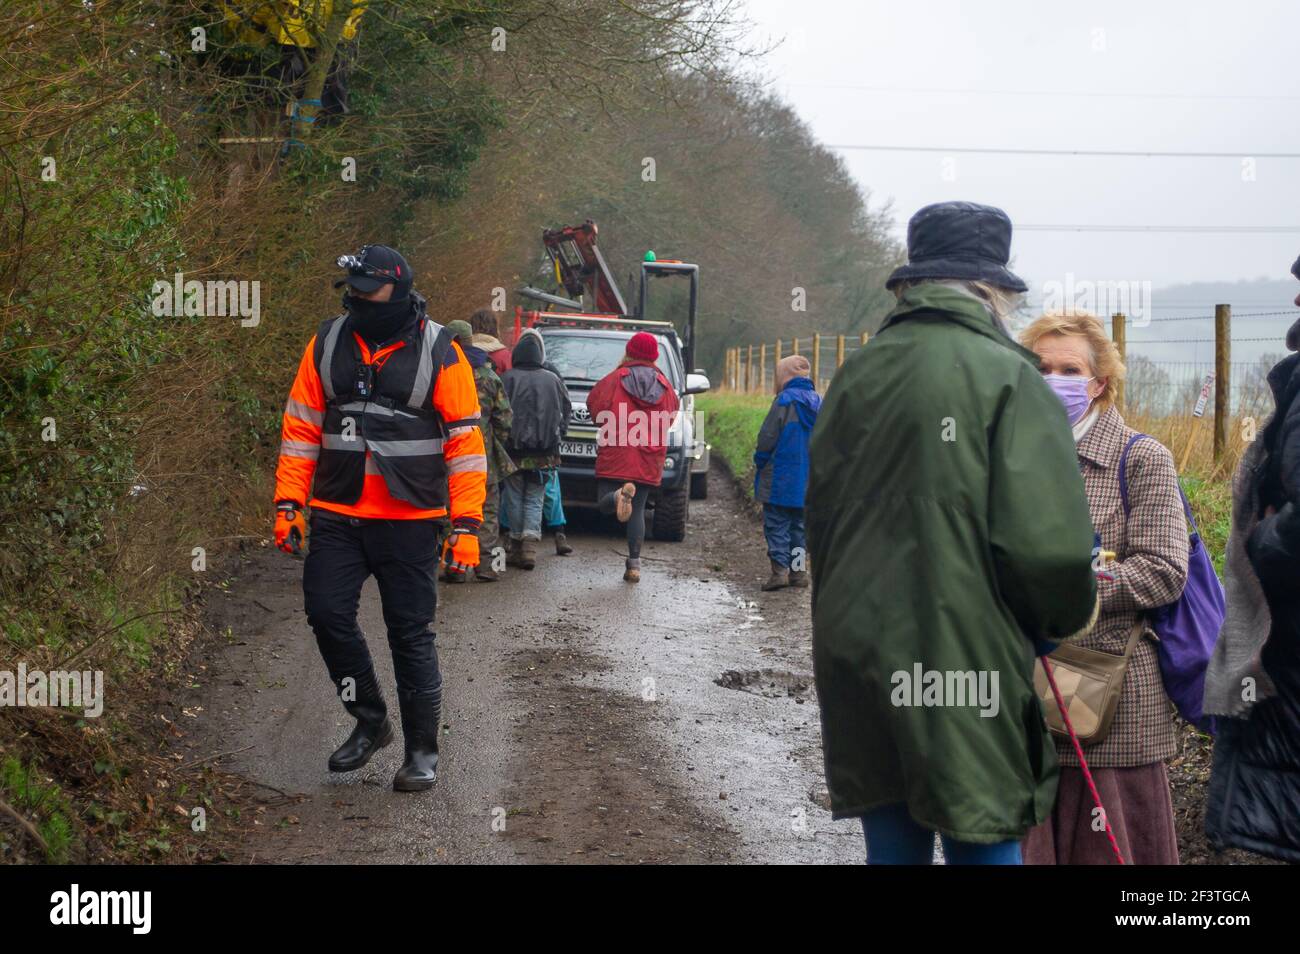 Great Missenden, Buckinghamshire, UK. 10th March, 2021. Early this morning HS2 Ltd and the National Eviction Team evicted Stop HS2 activists from the Leather Lane Protest Camp. HS2 were cutting limbs off an oak tree underneath a potential bat roost as well as destroying hedgerows before they destroy a row of iconic oak trees and build a temporary haul road. A wildlife crime was reported to Thames Valley Police. The controversial High Speed 2 rail link from London to Birmingham is carving a huge scar across the Chilterns. Credit: Maureen McLean/Alamy Stock Photo